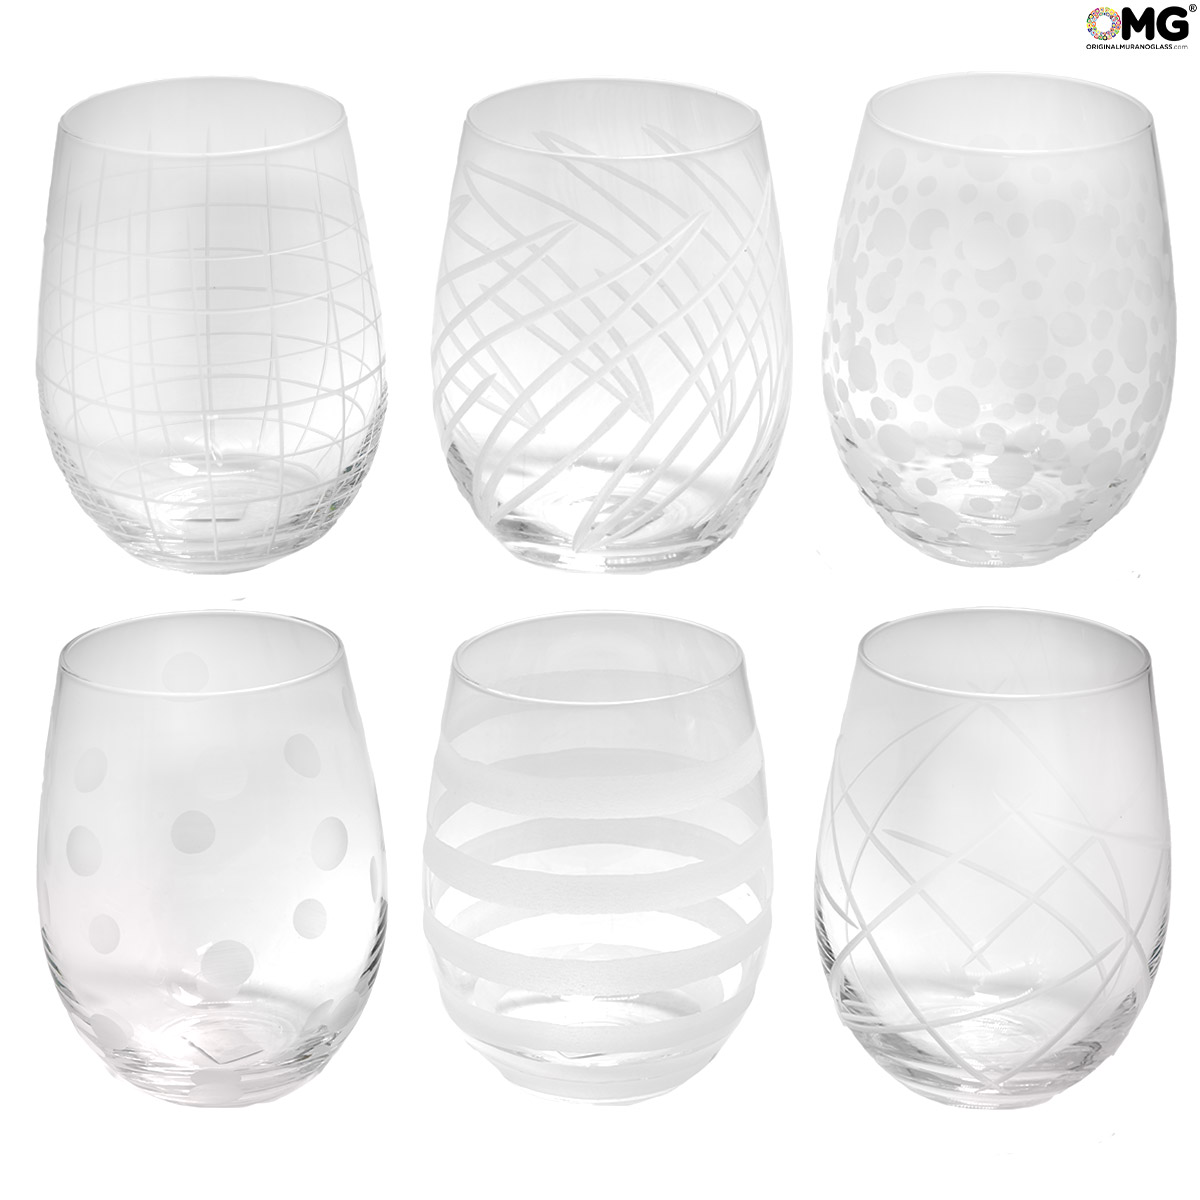 Murano-style Pastello Indented Drinking Glasses Set of 6 